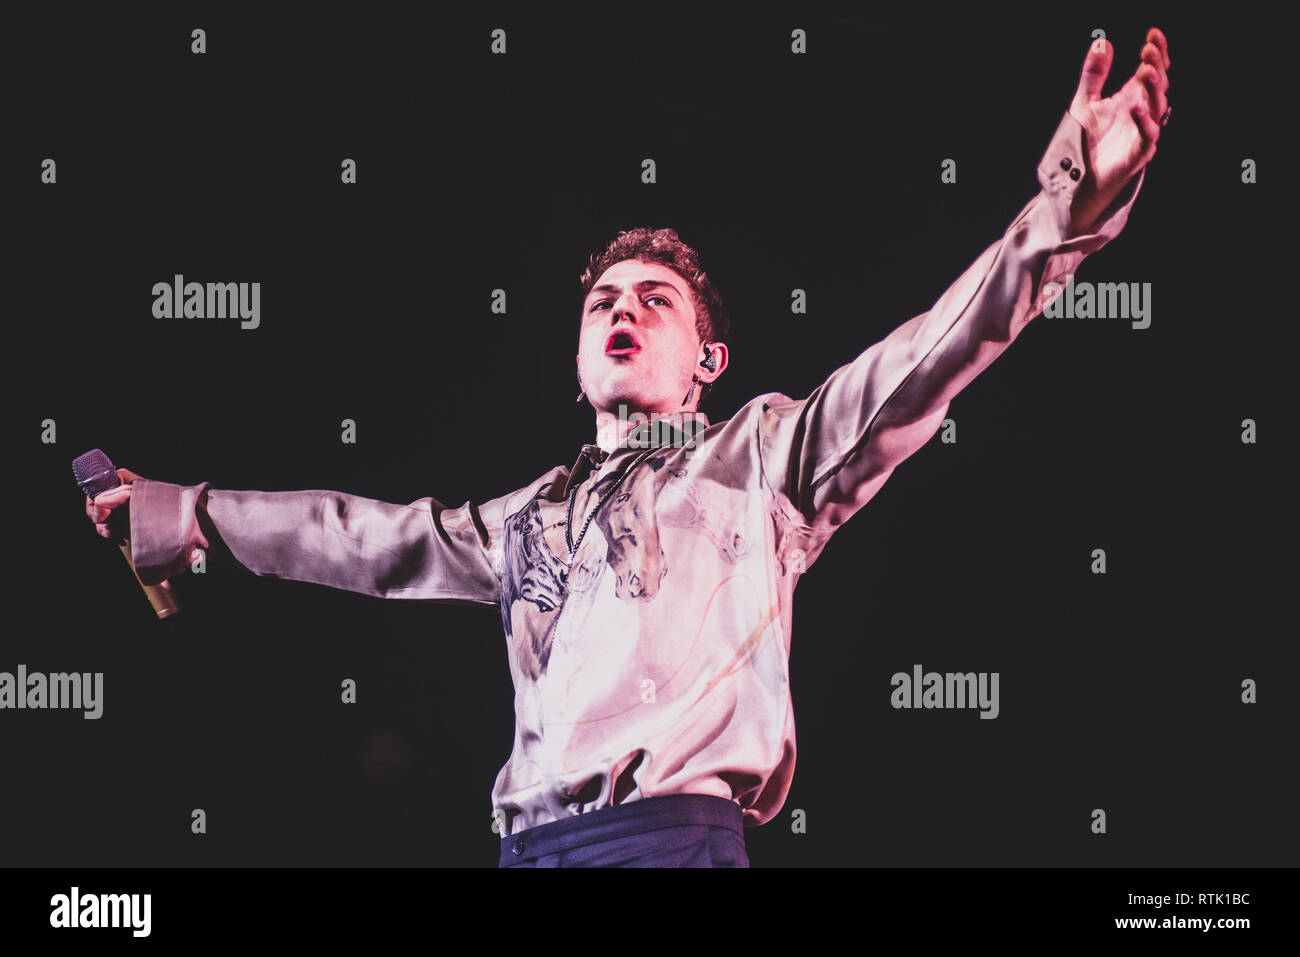 Venaria, Italy. 1st Mar 2019. The Italian singer Irama, stage name of Filippo Maria Fanti, performing live on stage for his first "Giovani per Sempre" (Forever Young) tour concert in Venaria, at the Teatro della Concordia, in front a sold out venue. Credit: Alessandro Bosio/Alamy Live News Stock Photo